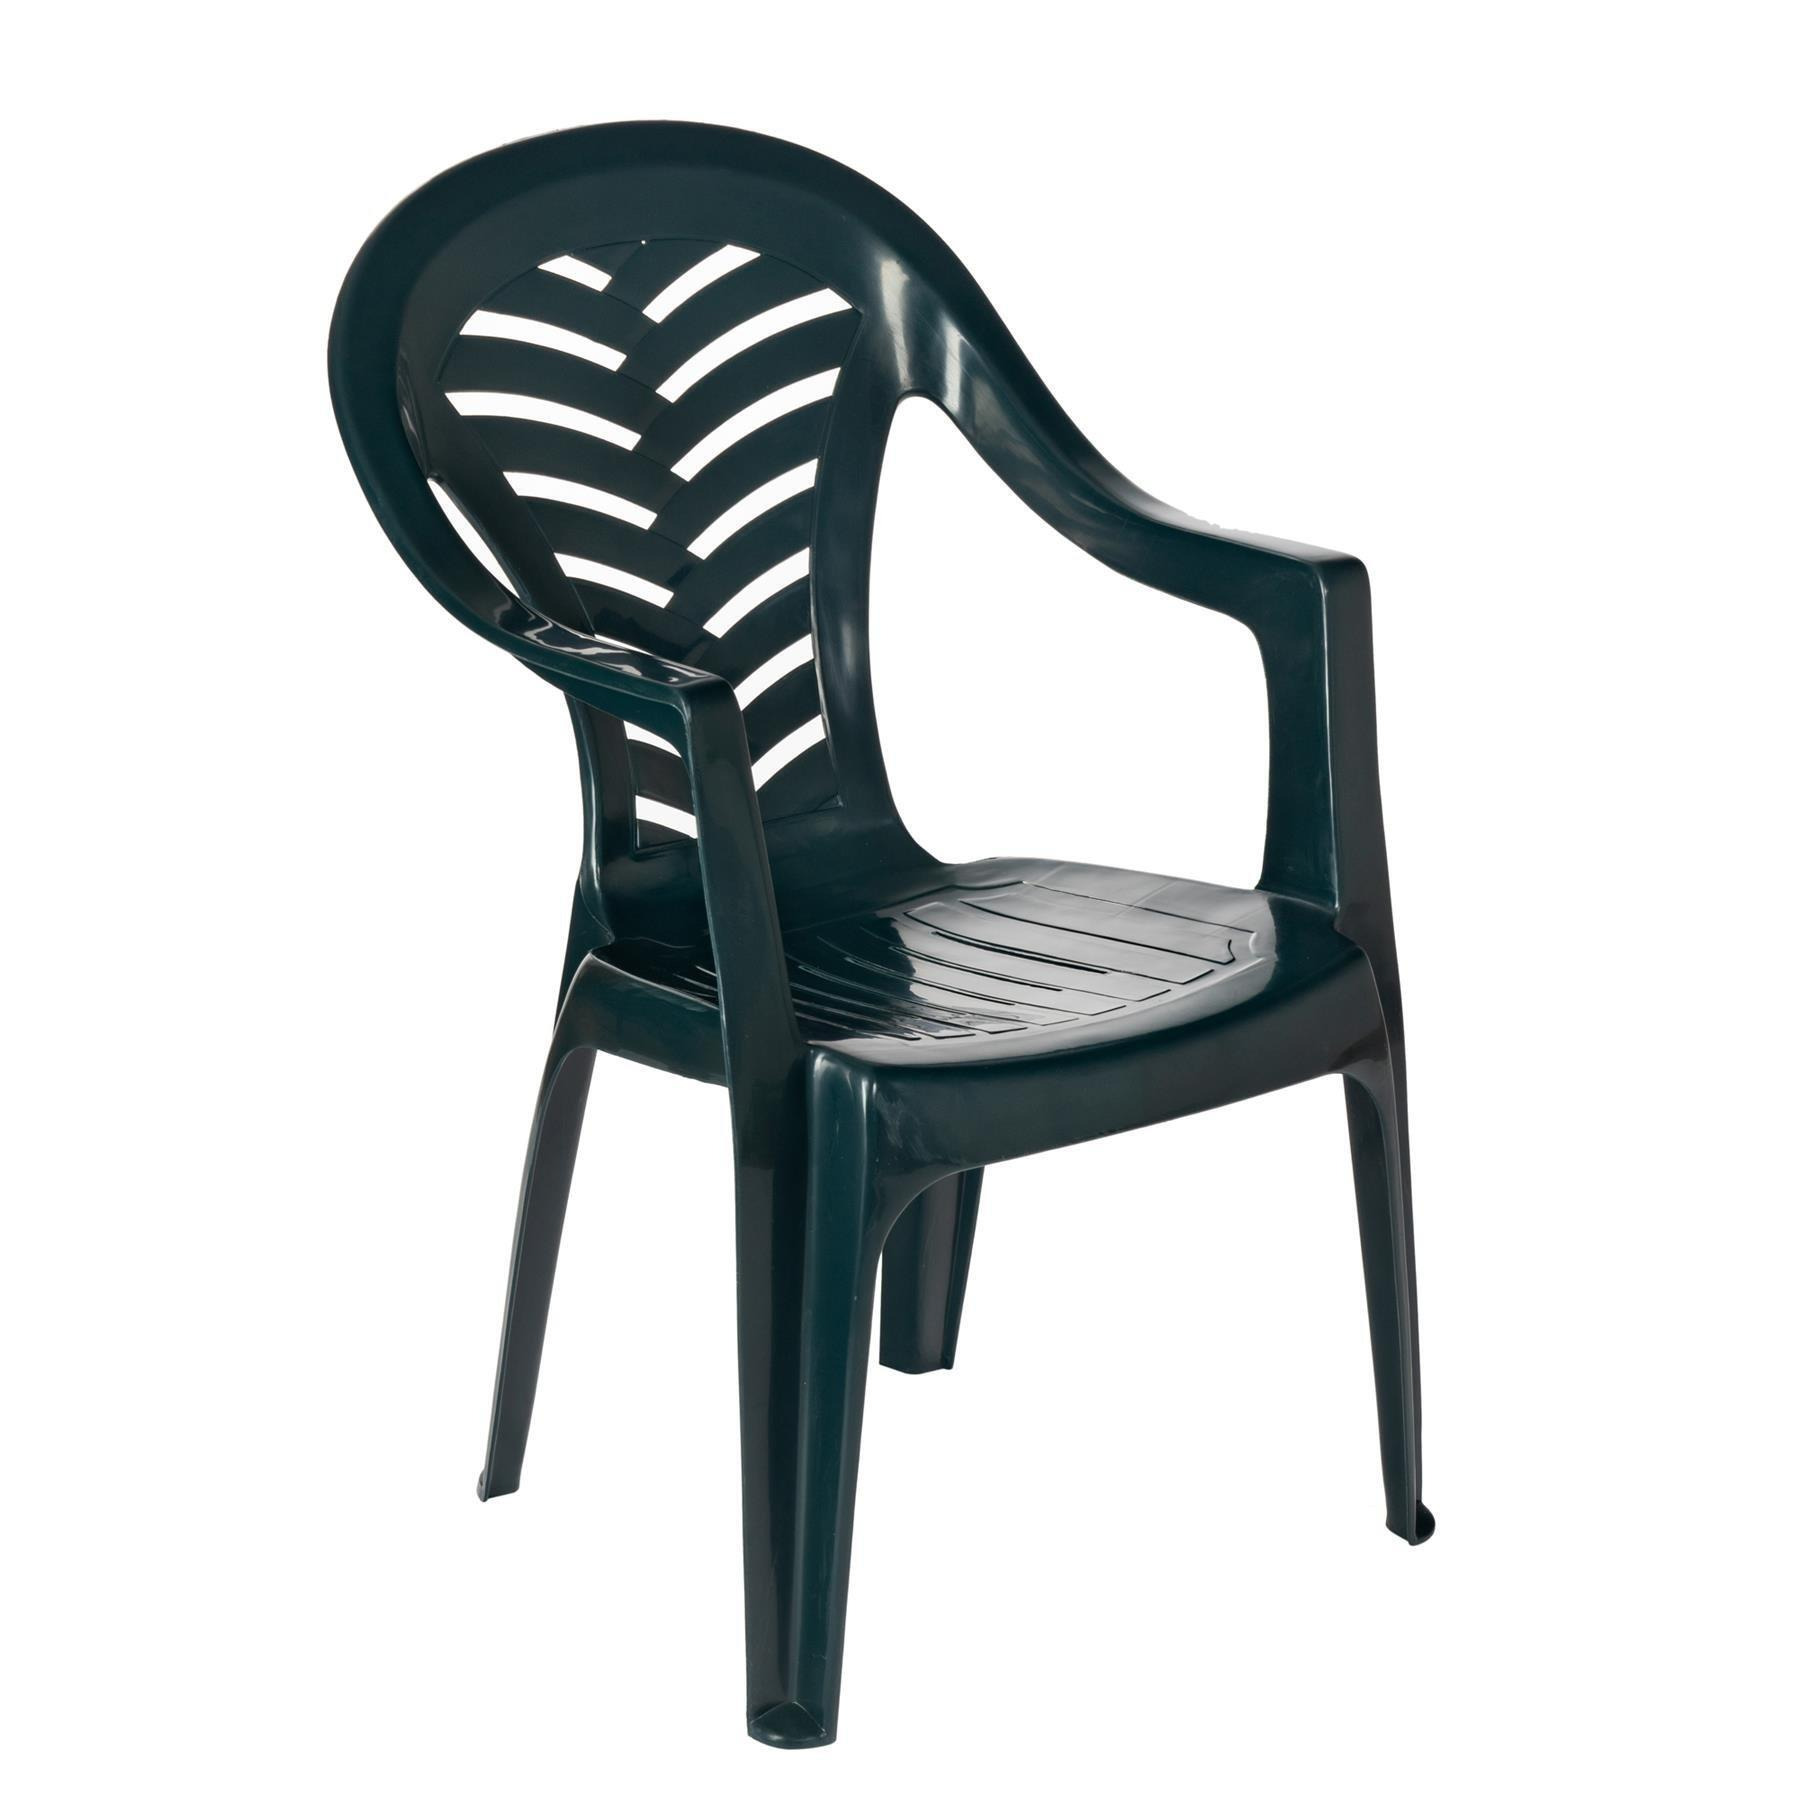 Palma Garden Dining Chairs Pack of 2 - image 1